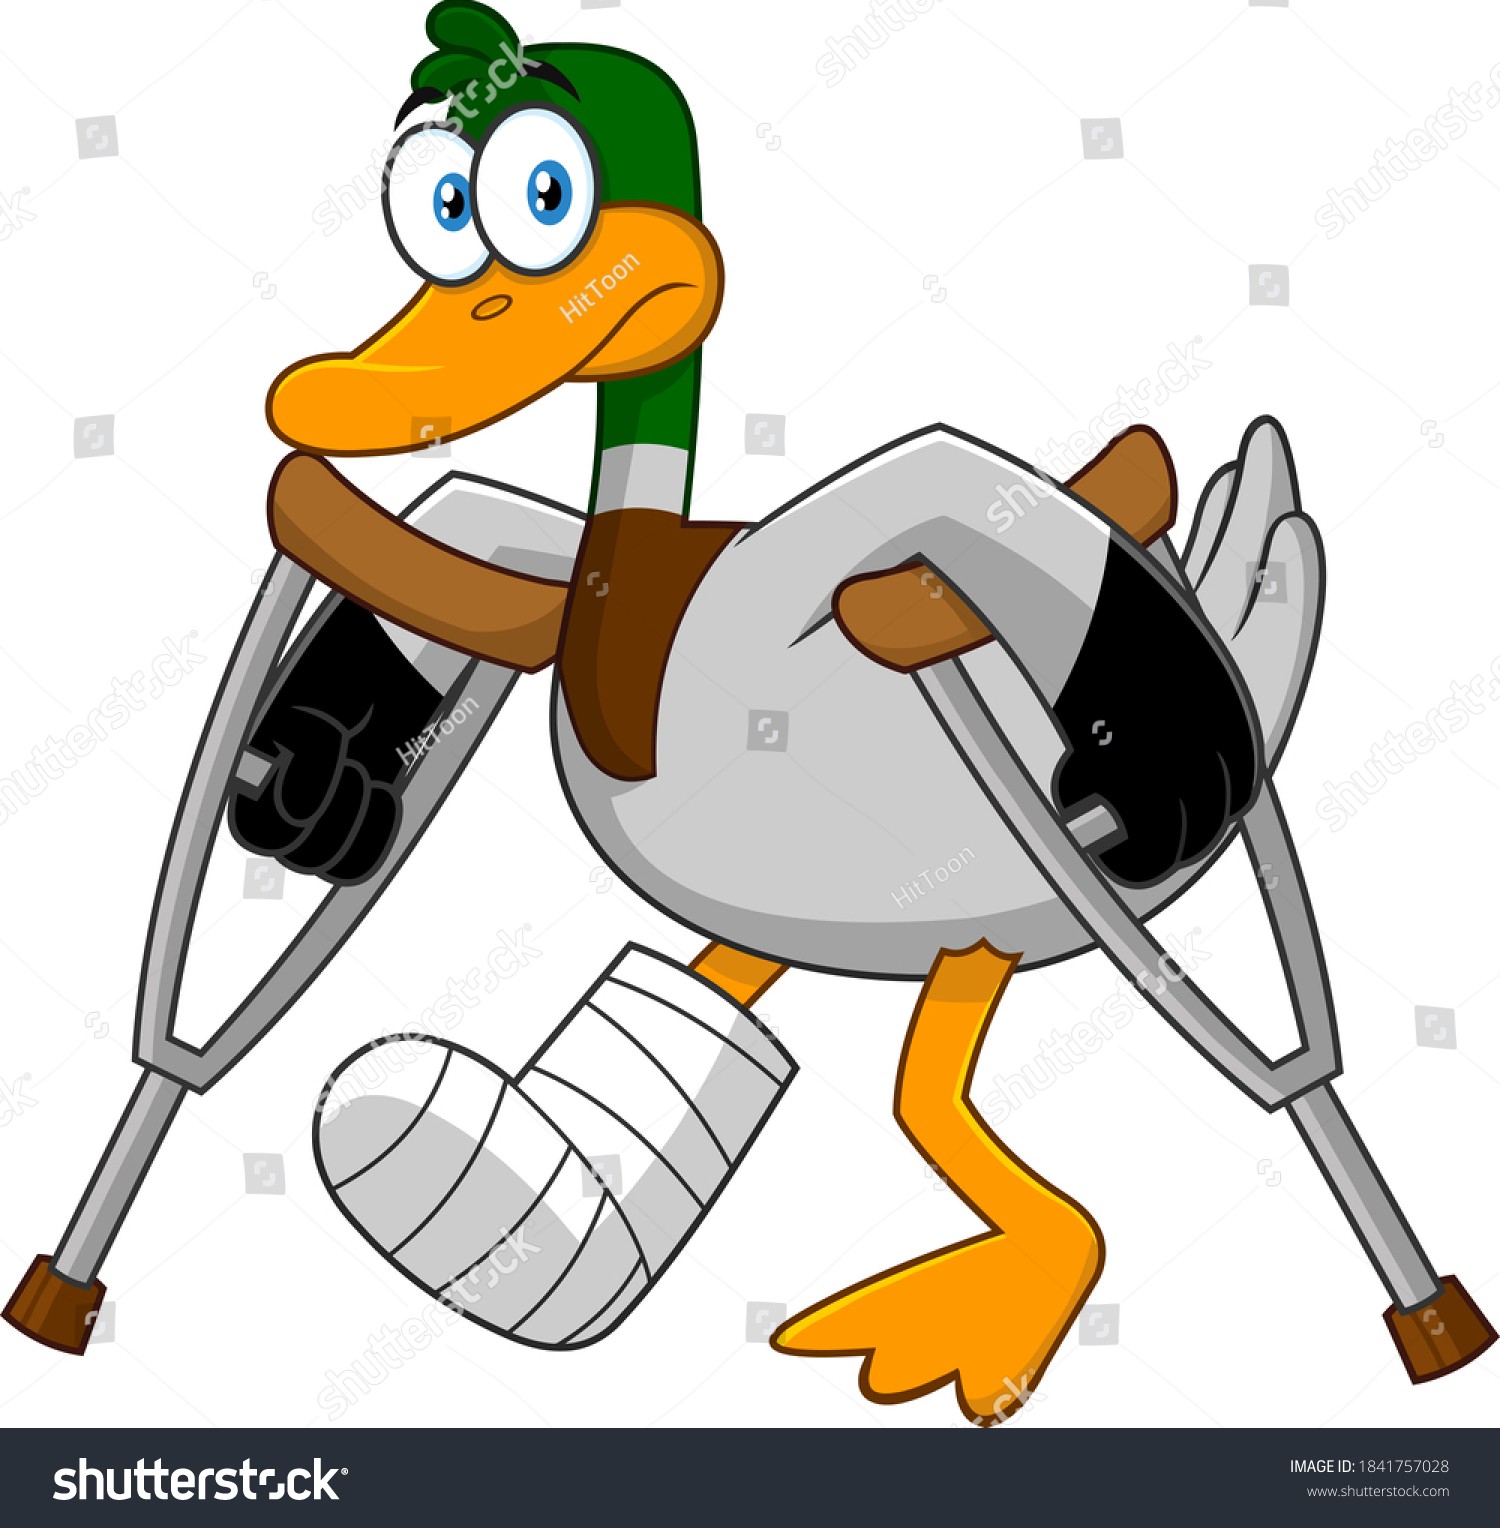 stock-photo-sad-duck-cartoon-character-with-crutches-and-plastered-leg-raster-illustration-isolated-on-white-1841757028.jpg